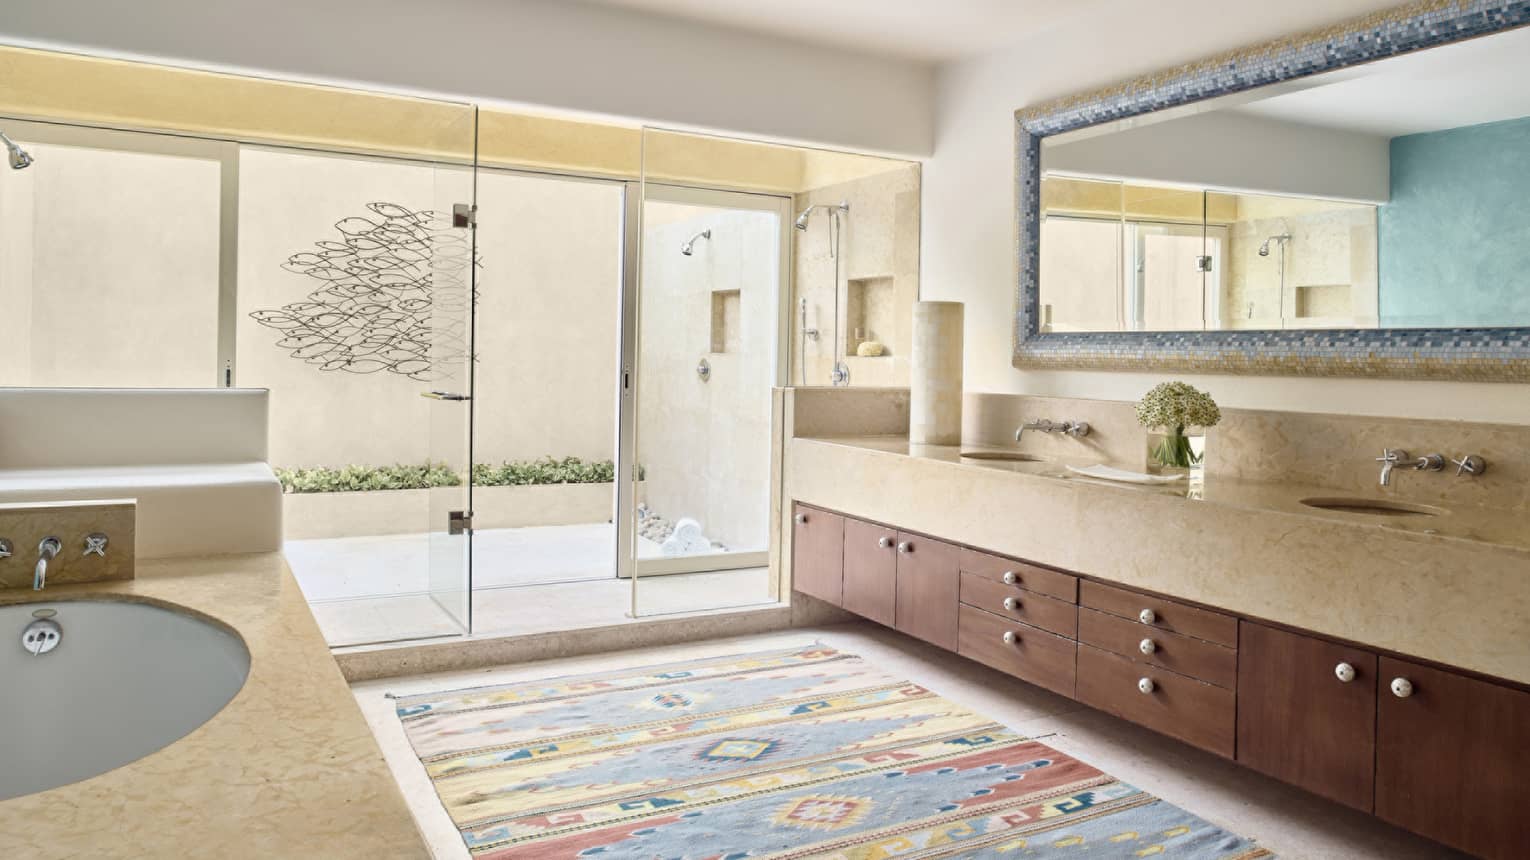 Large bathroom with Mexican motif rug, double vanity, walk-out terrace